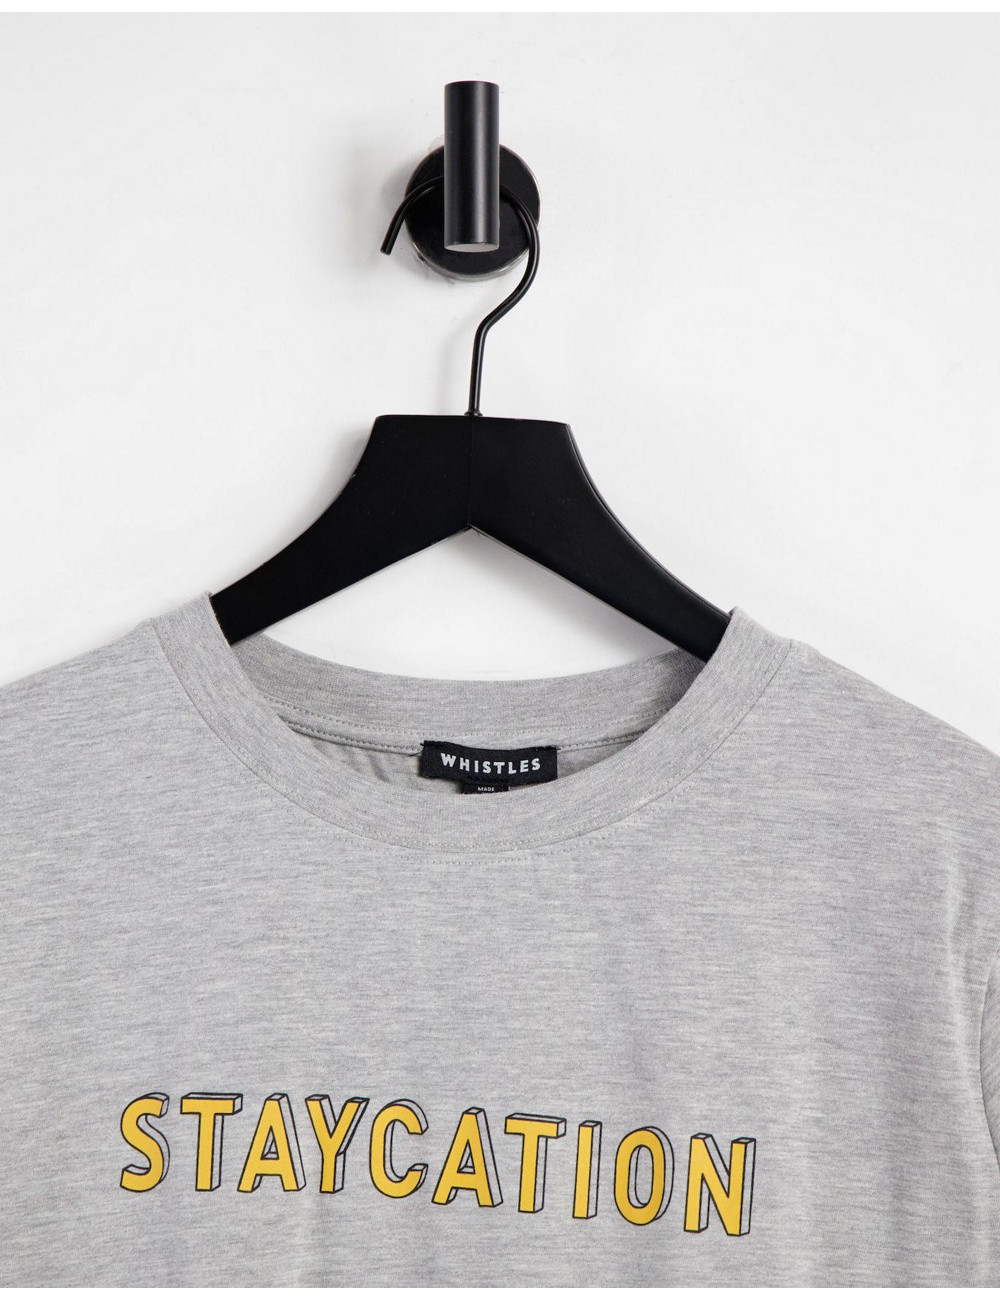 Whistles staycation logo t...